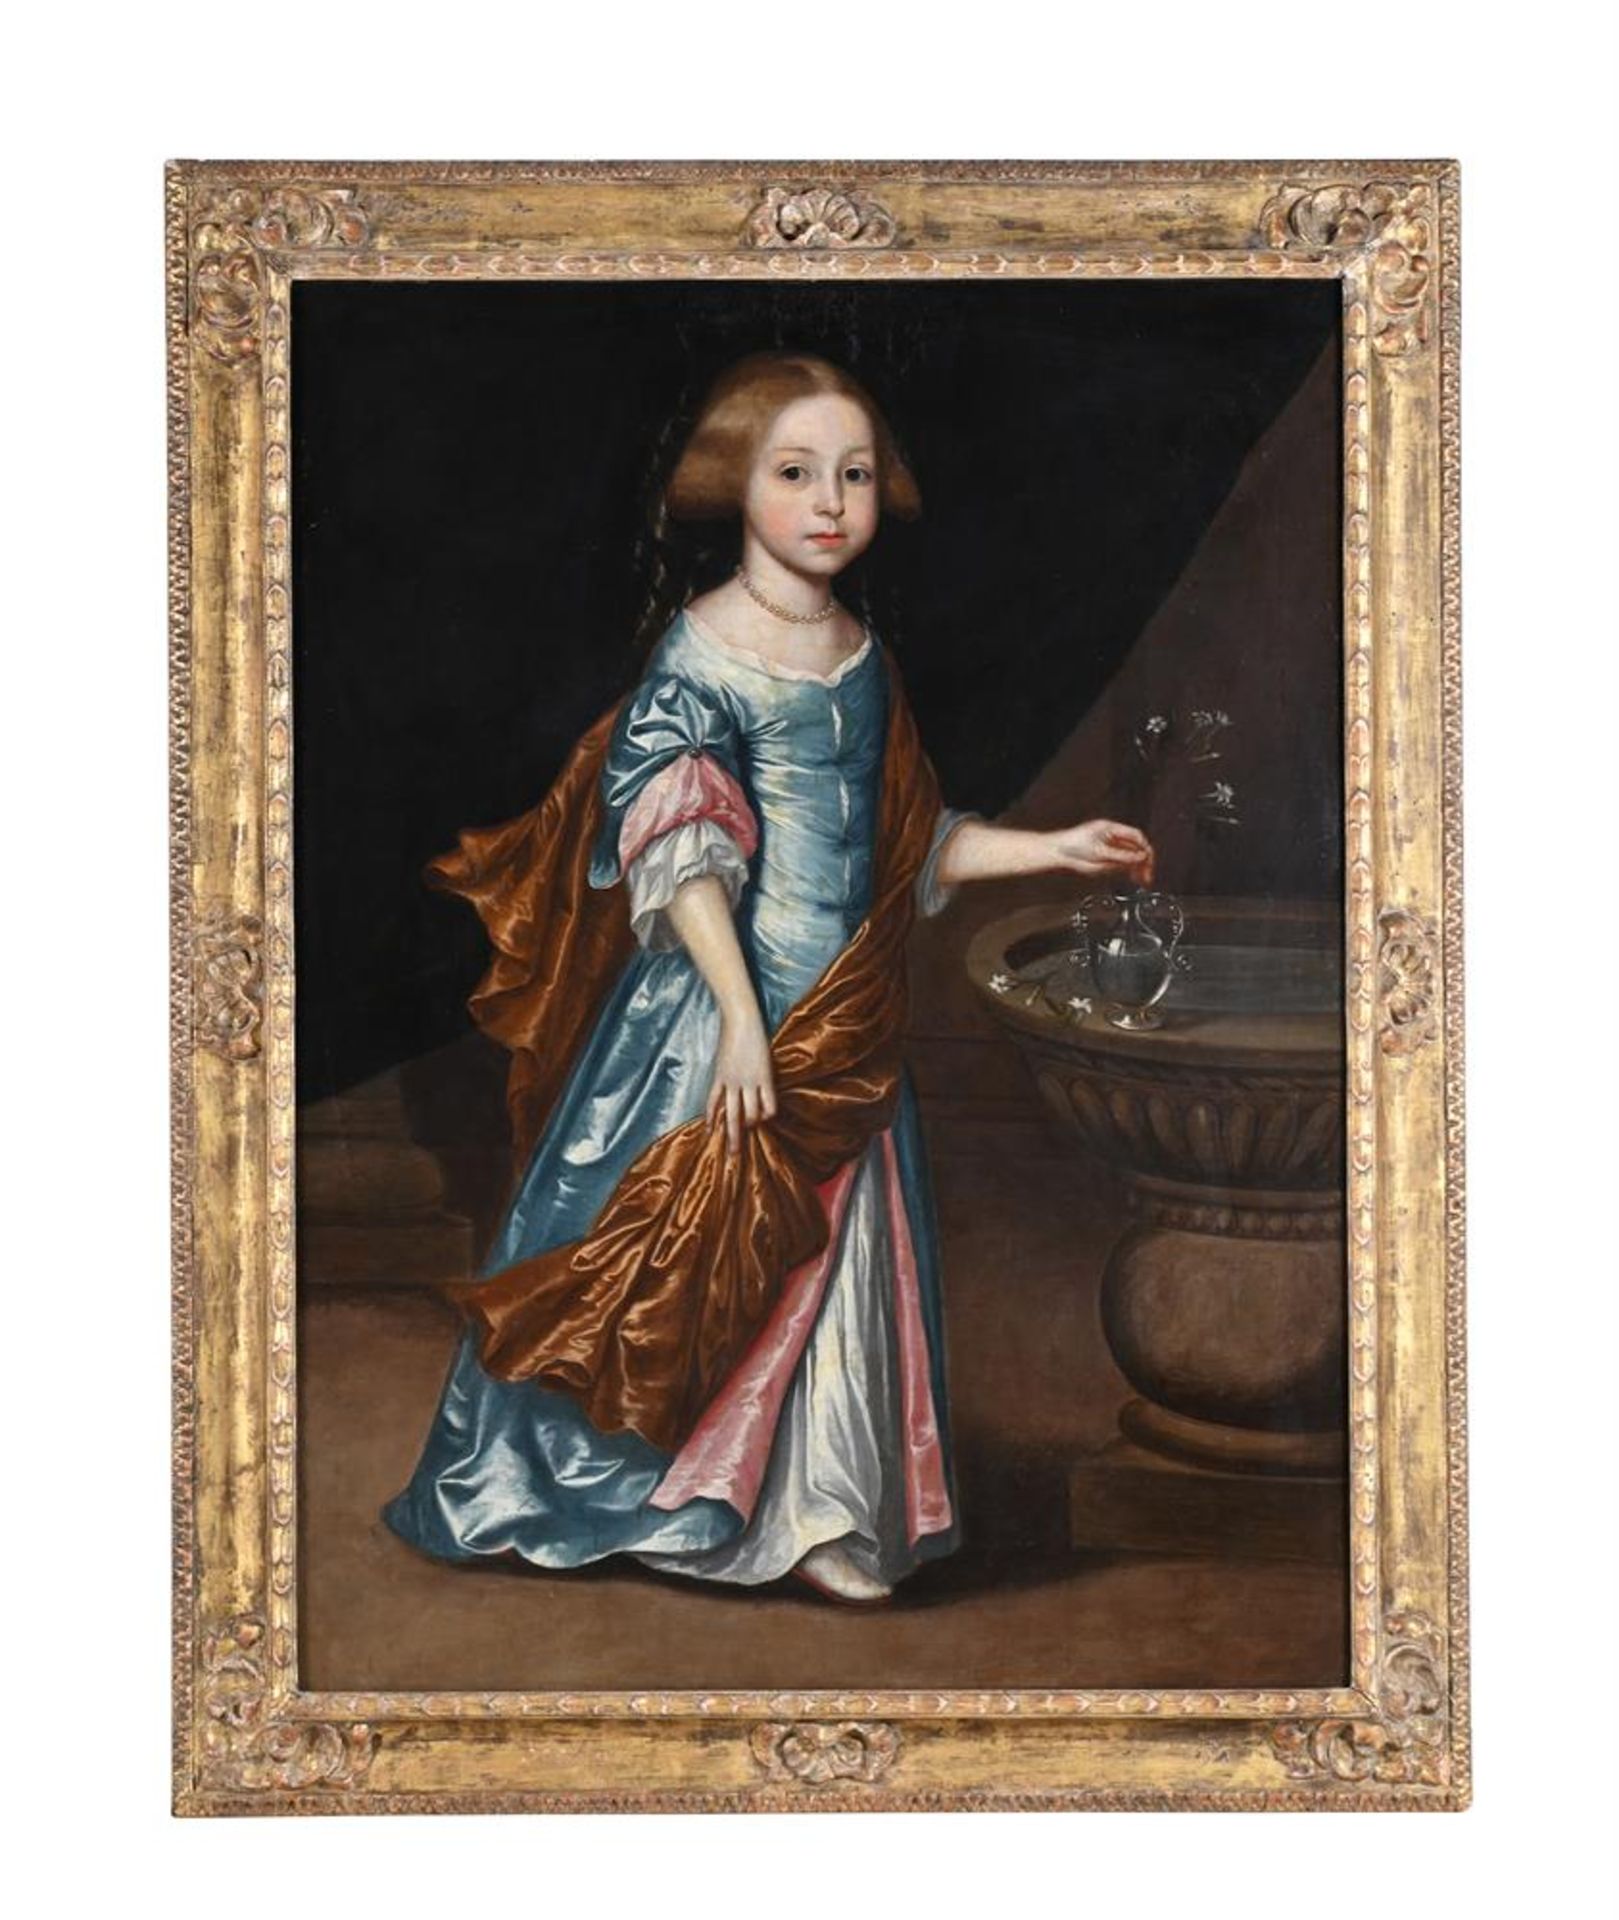 FOLLOWER OF SIR PETER LELY, PORTRAIT OF A CHILD IN A TURQUOISE DRESS - Image 2 of 3